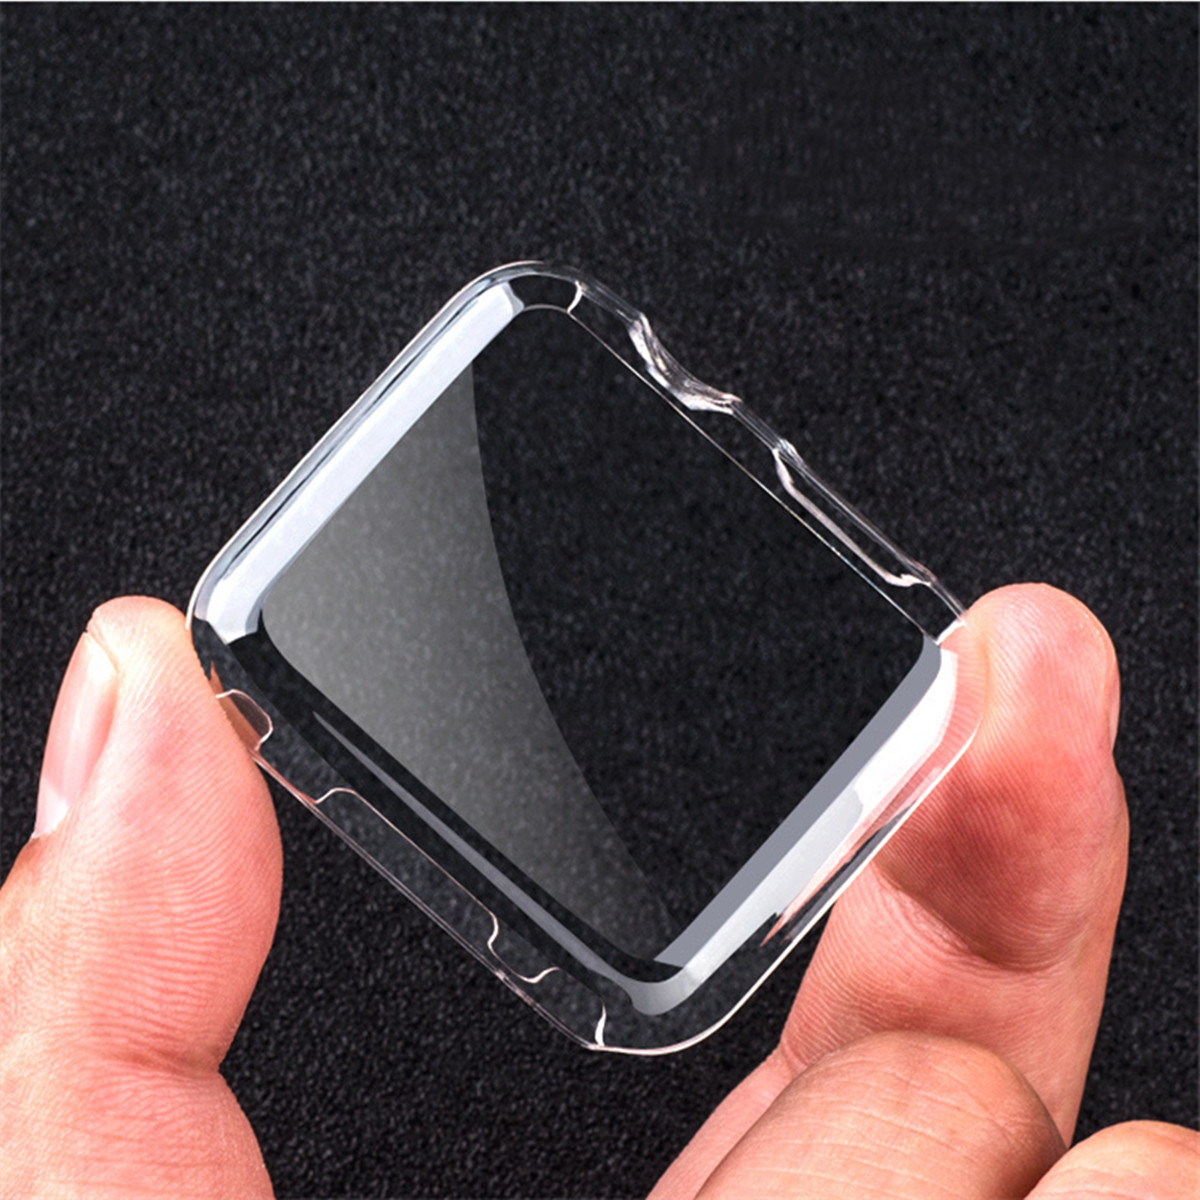 Transparent-Clear-Slim-Hard-Snap-On-Case-Cover-Screen-Protector-For-3842mm-Apple-Watch-Series-2-1132676-2